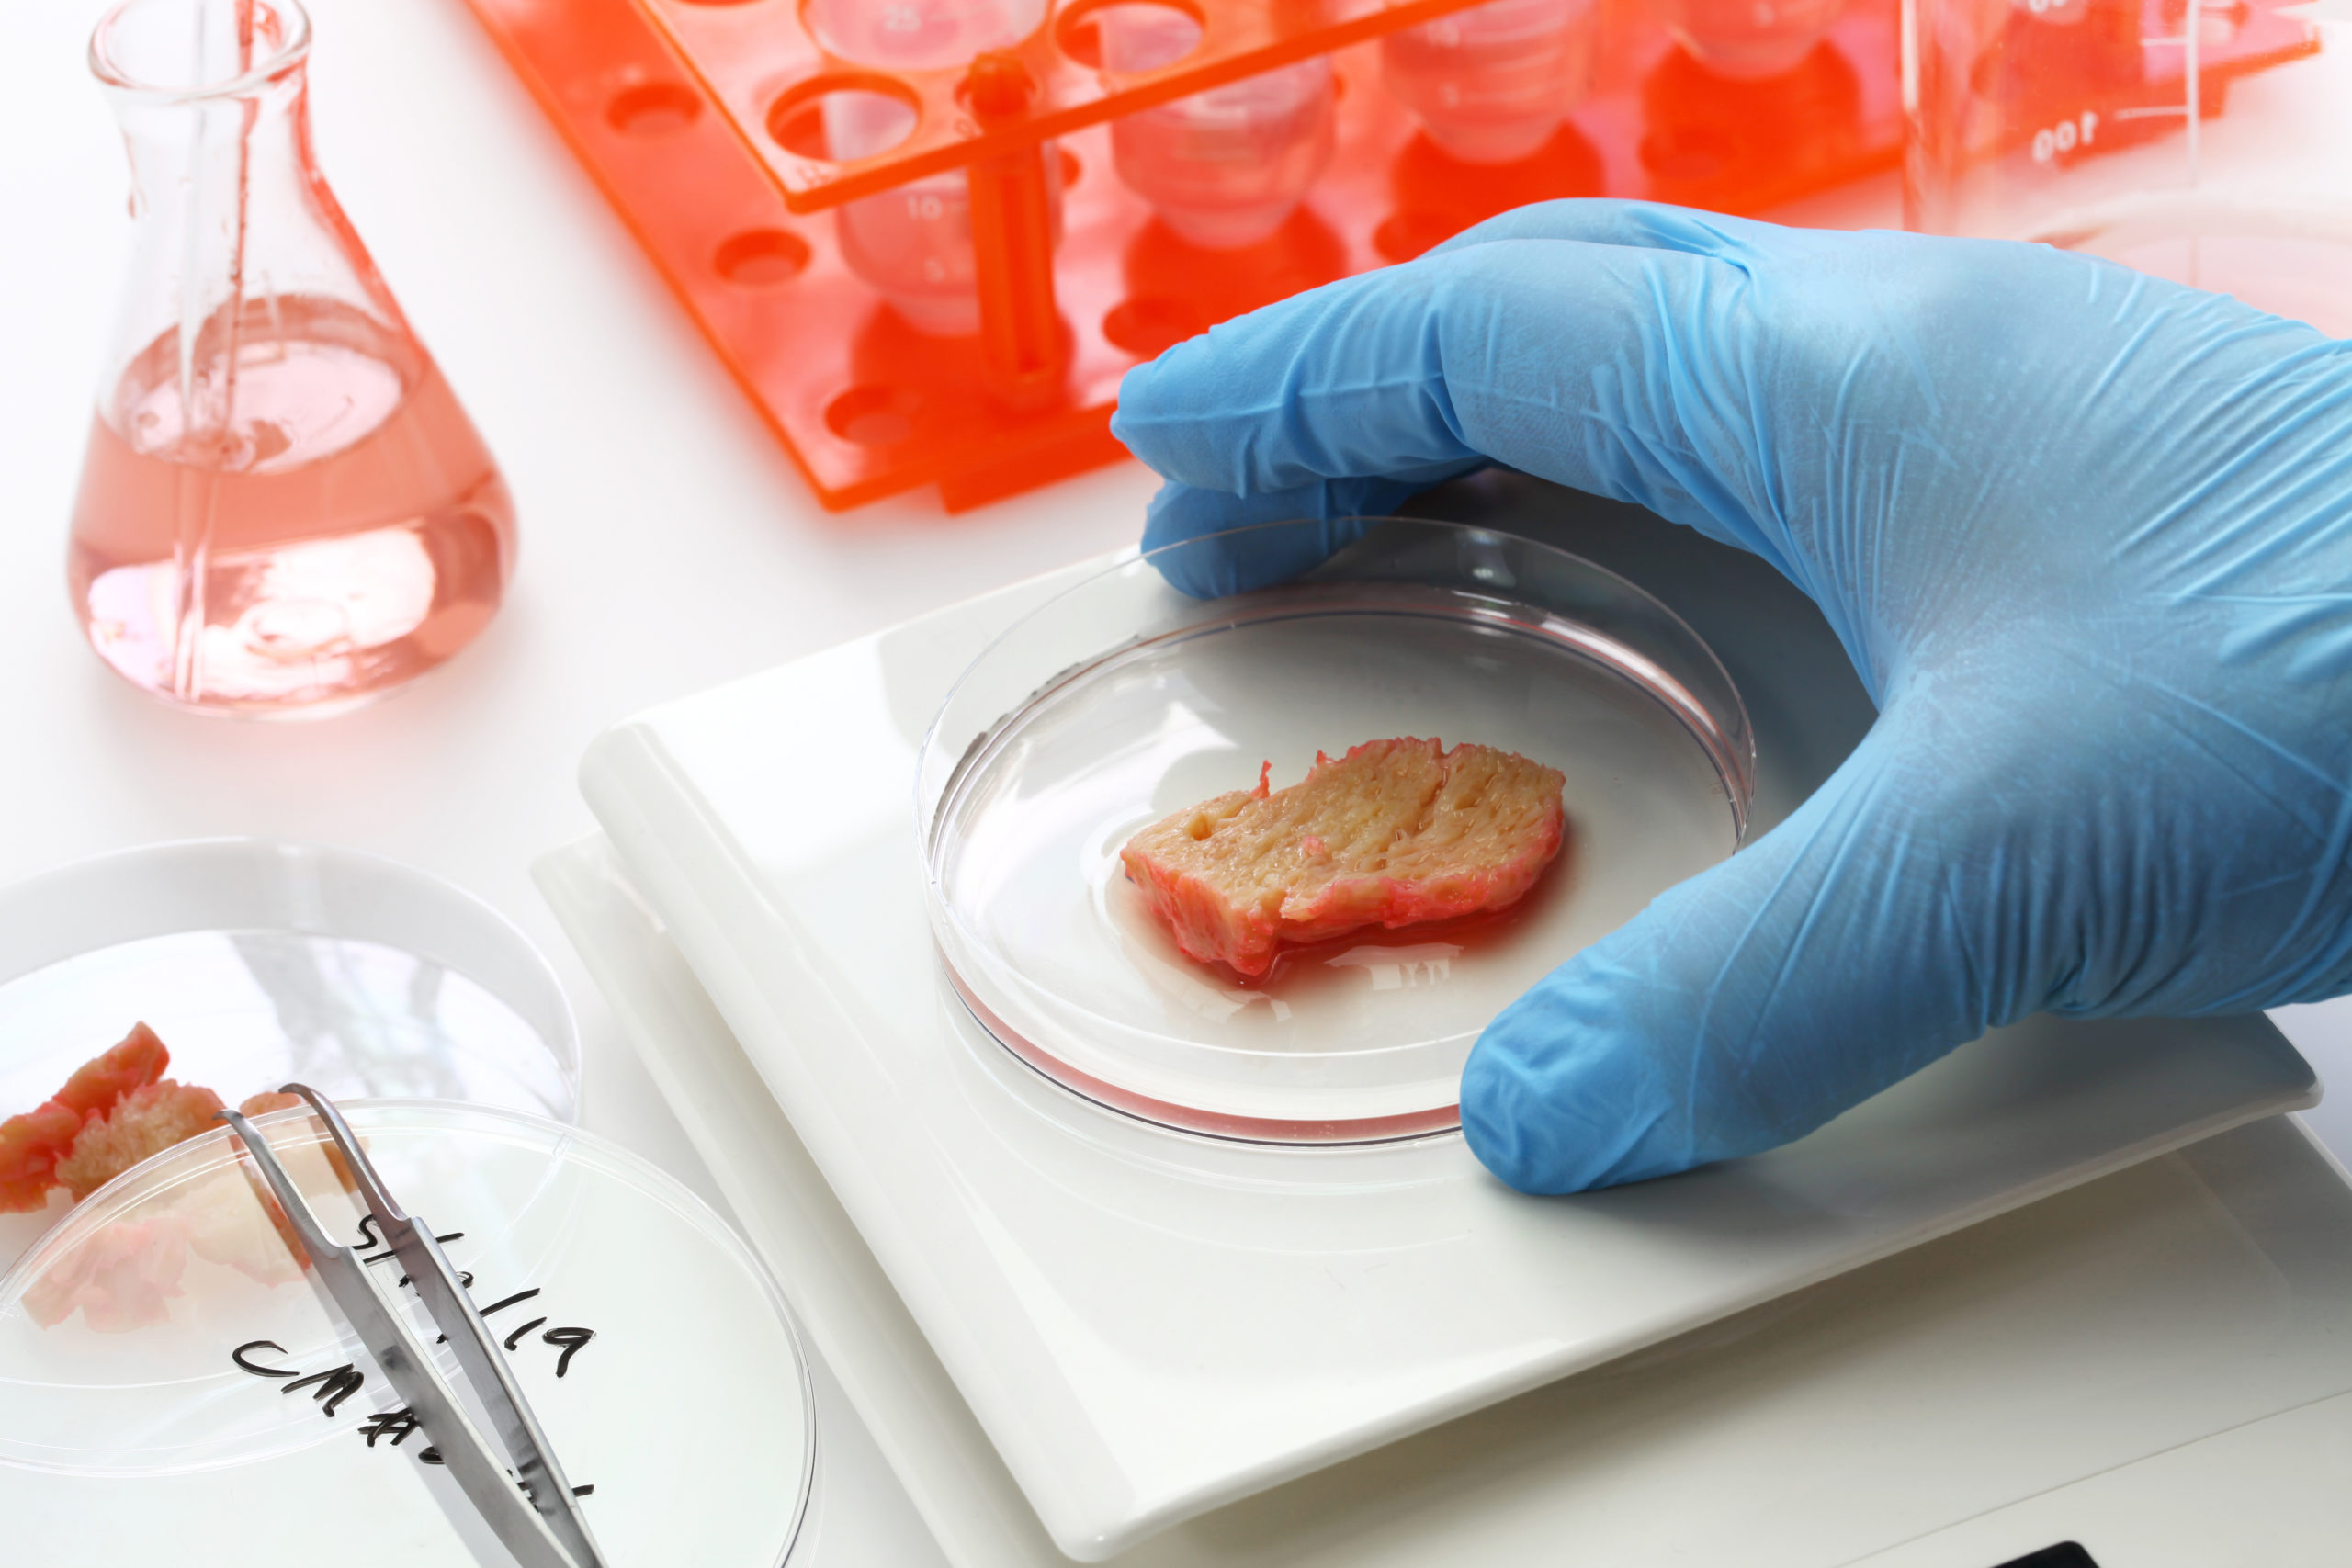 cultured meat making image, lab grown meat concept sicurezza alimentare